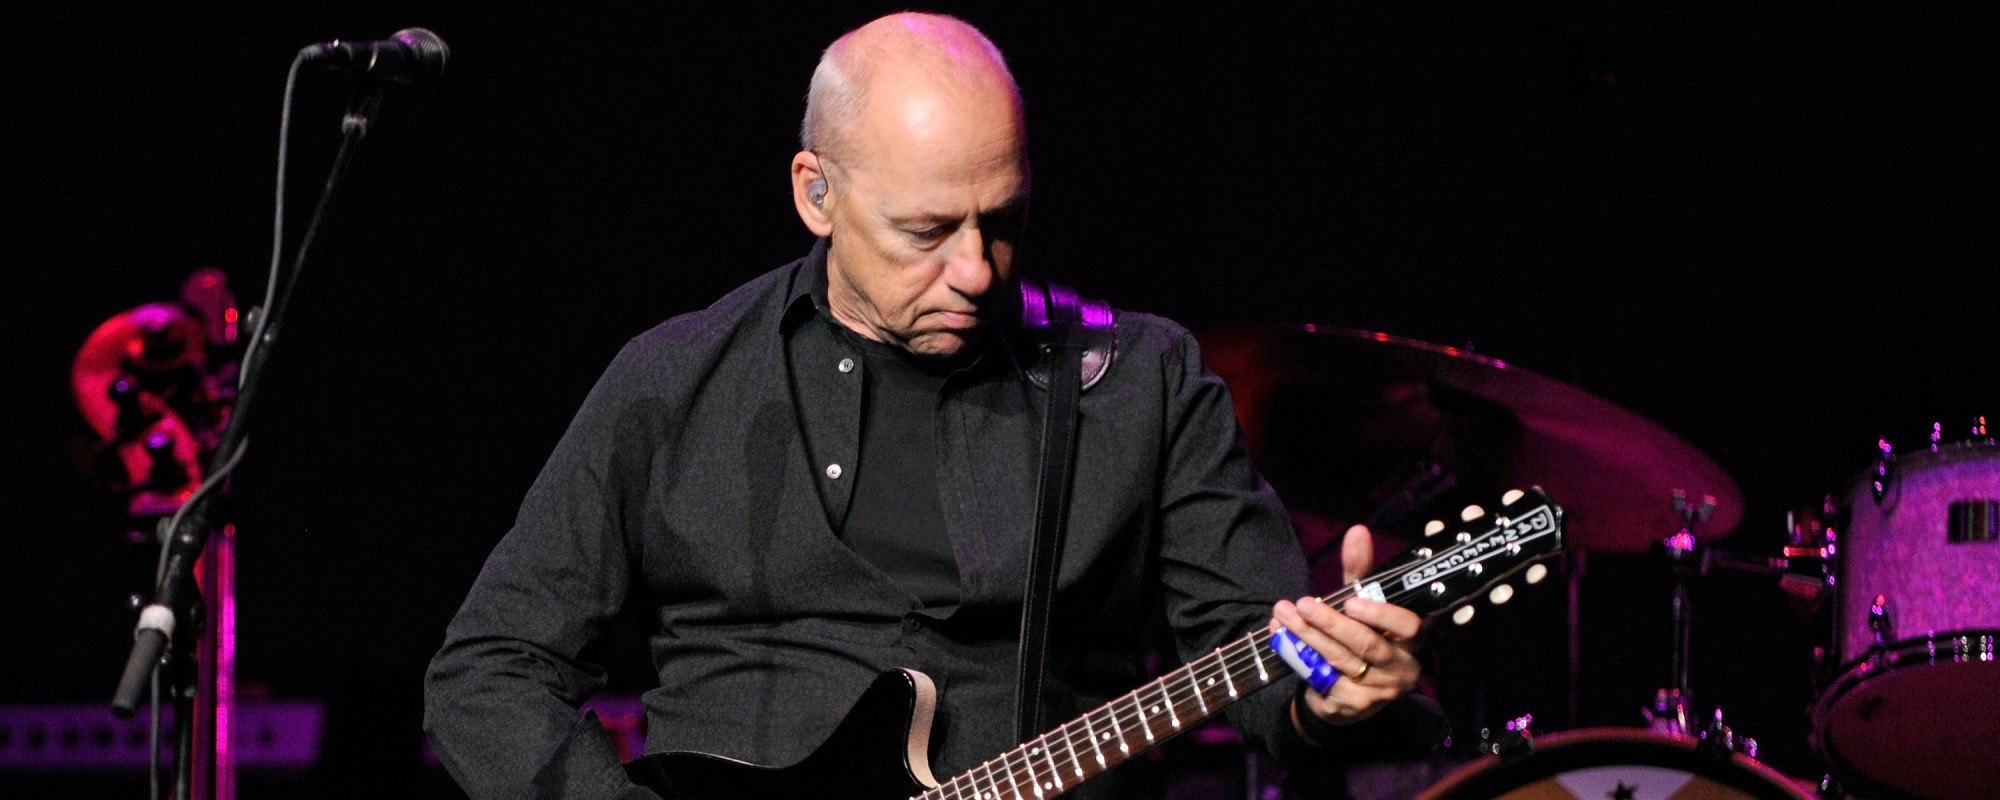 Mark Knopfler, Biography, Songs, Dire Straits, & Facts